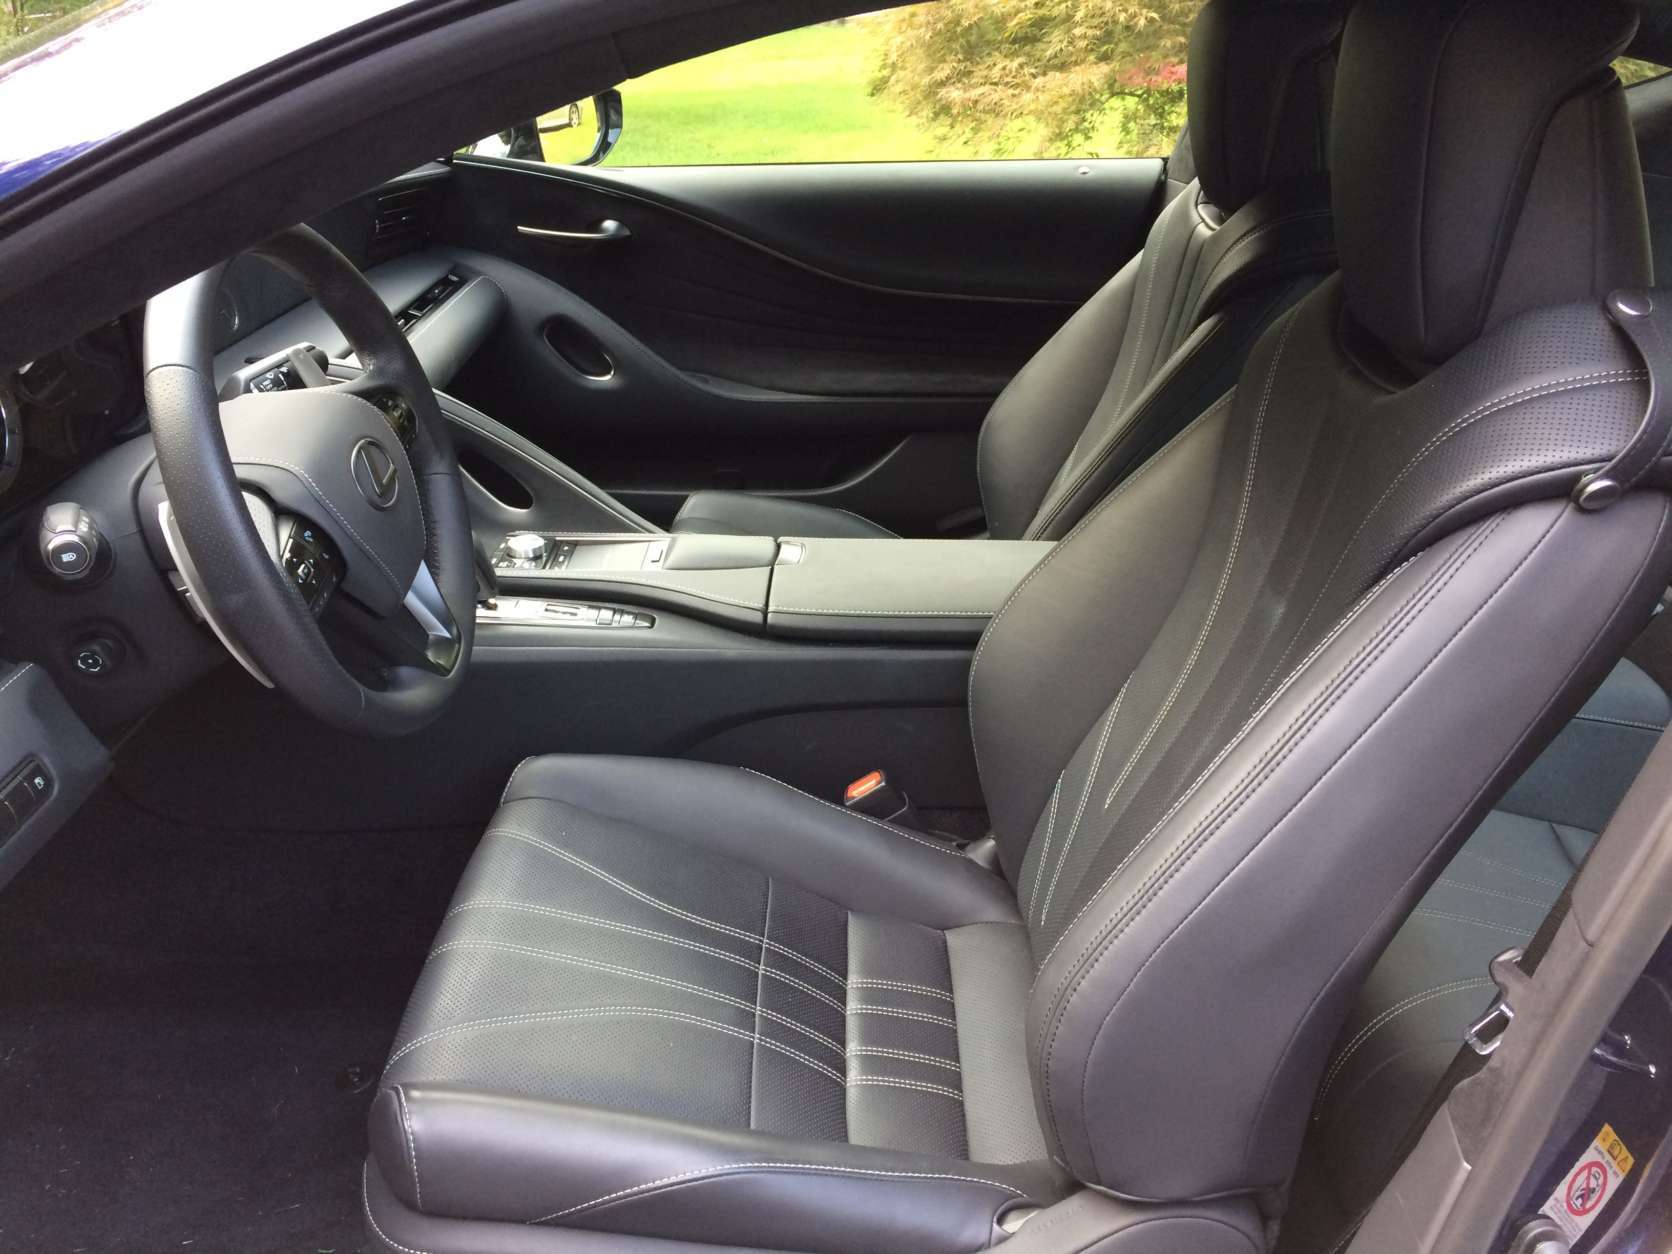 The leather seats have contrasting stitching in an interesting design that carries over on to the center console, arm rest, steering wheel and dash. Space in the front seats should fit most people without problems. (WTOP/Mike Parris) 